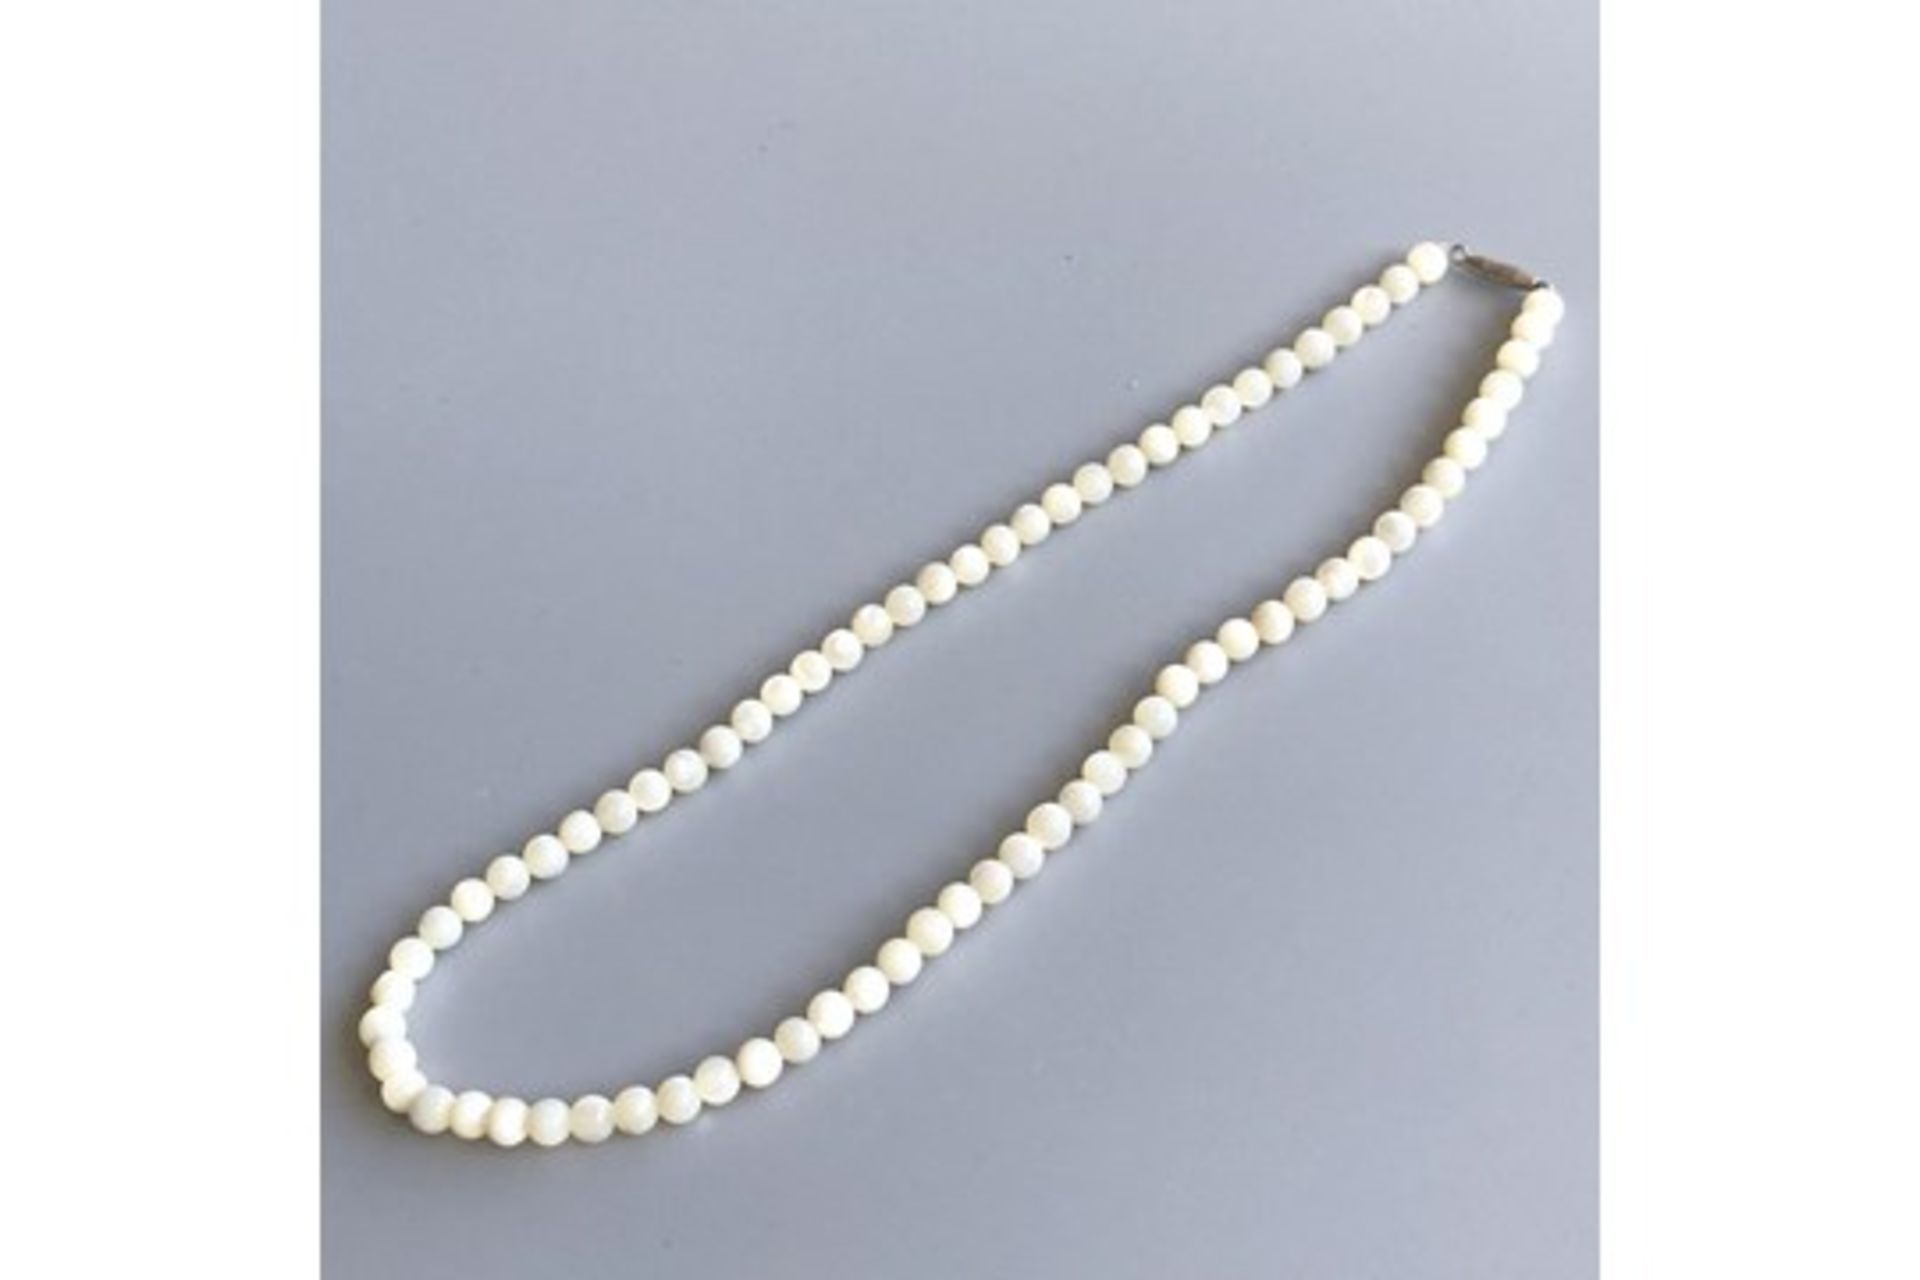 Antique Mother of Pearl Bead Necklace - small round 5mm beads - screw clasp - Image 3 of 3